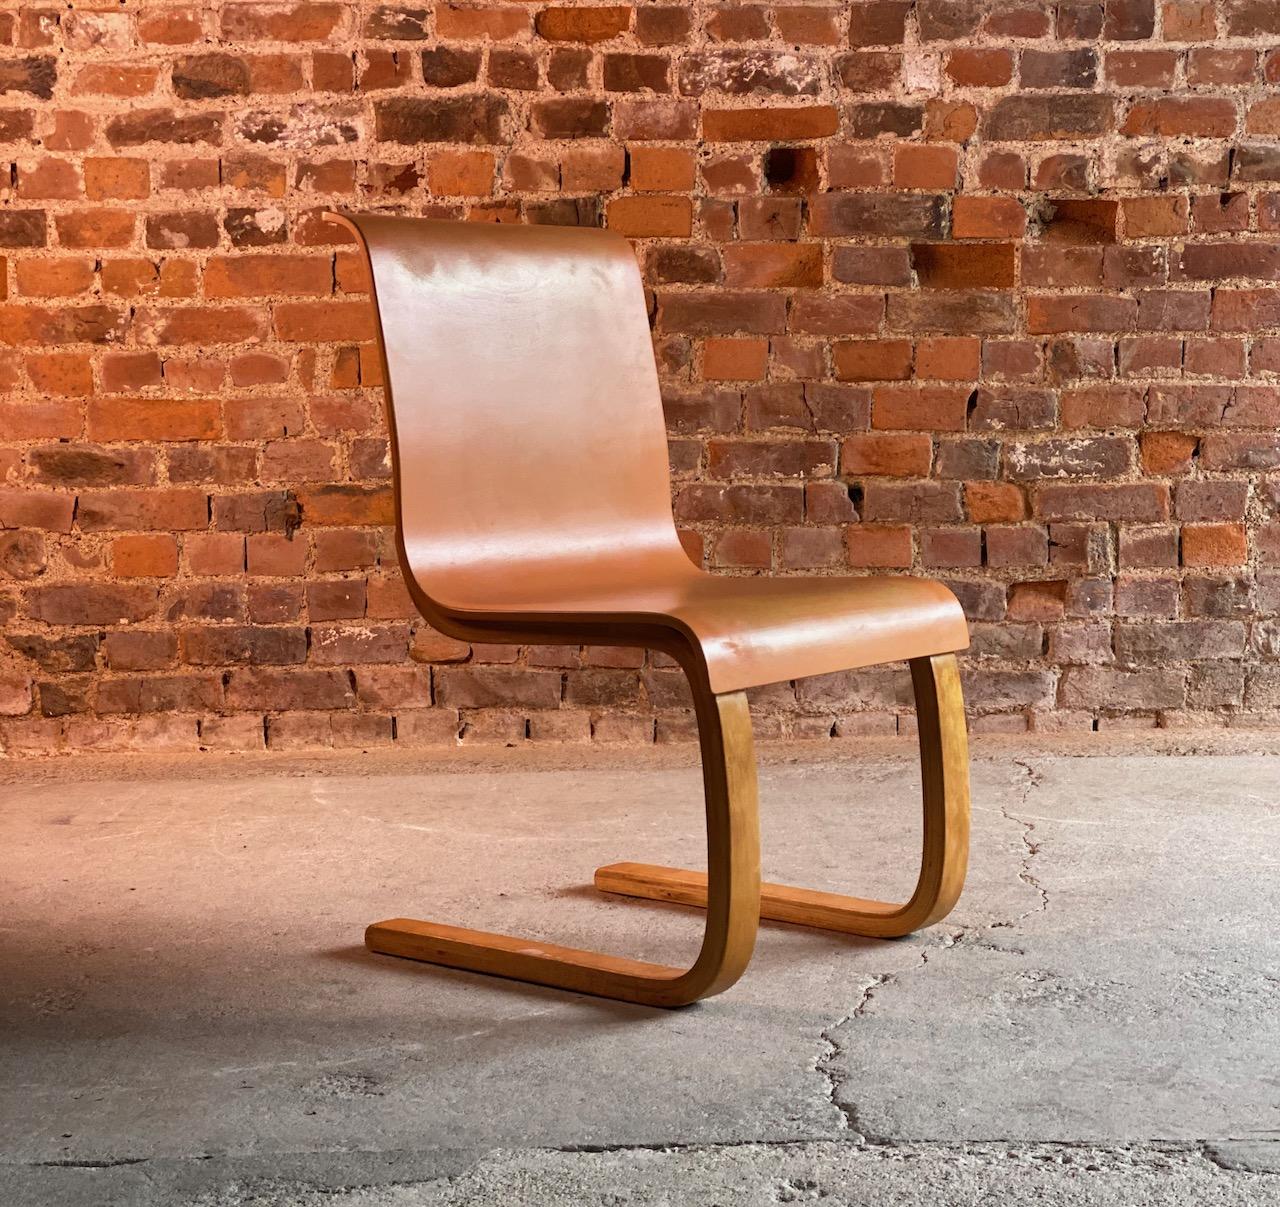 Alvar Aalto Model 21 Cantilever side chair by Finmar Finland circa 1935 Number 2

Stunning original and highly sought after Alvar Aalto Model 21 Cantilever side chair for Finmar Finland circa 1935, bent laminated birch frame with moulded Ornage